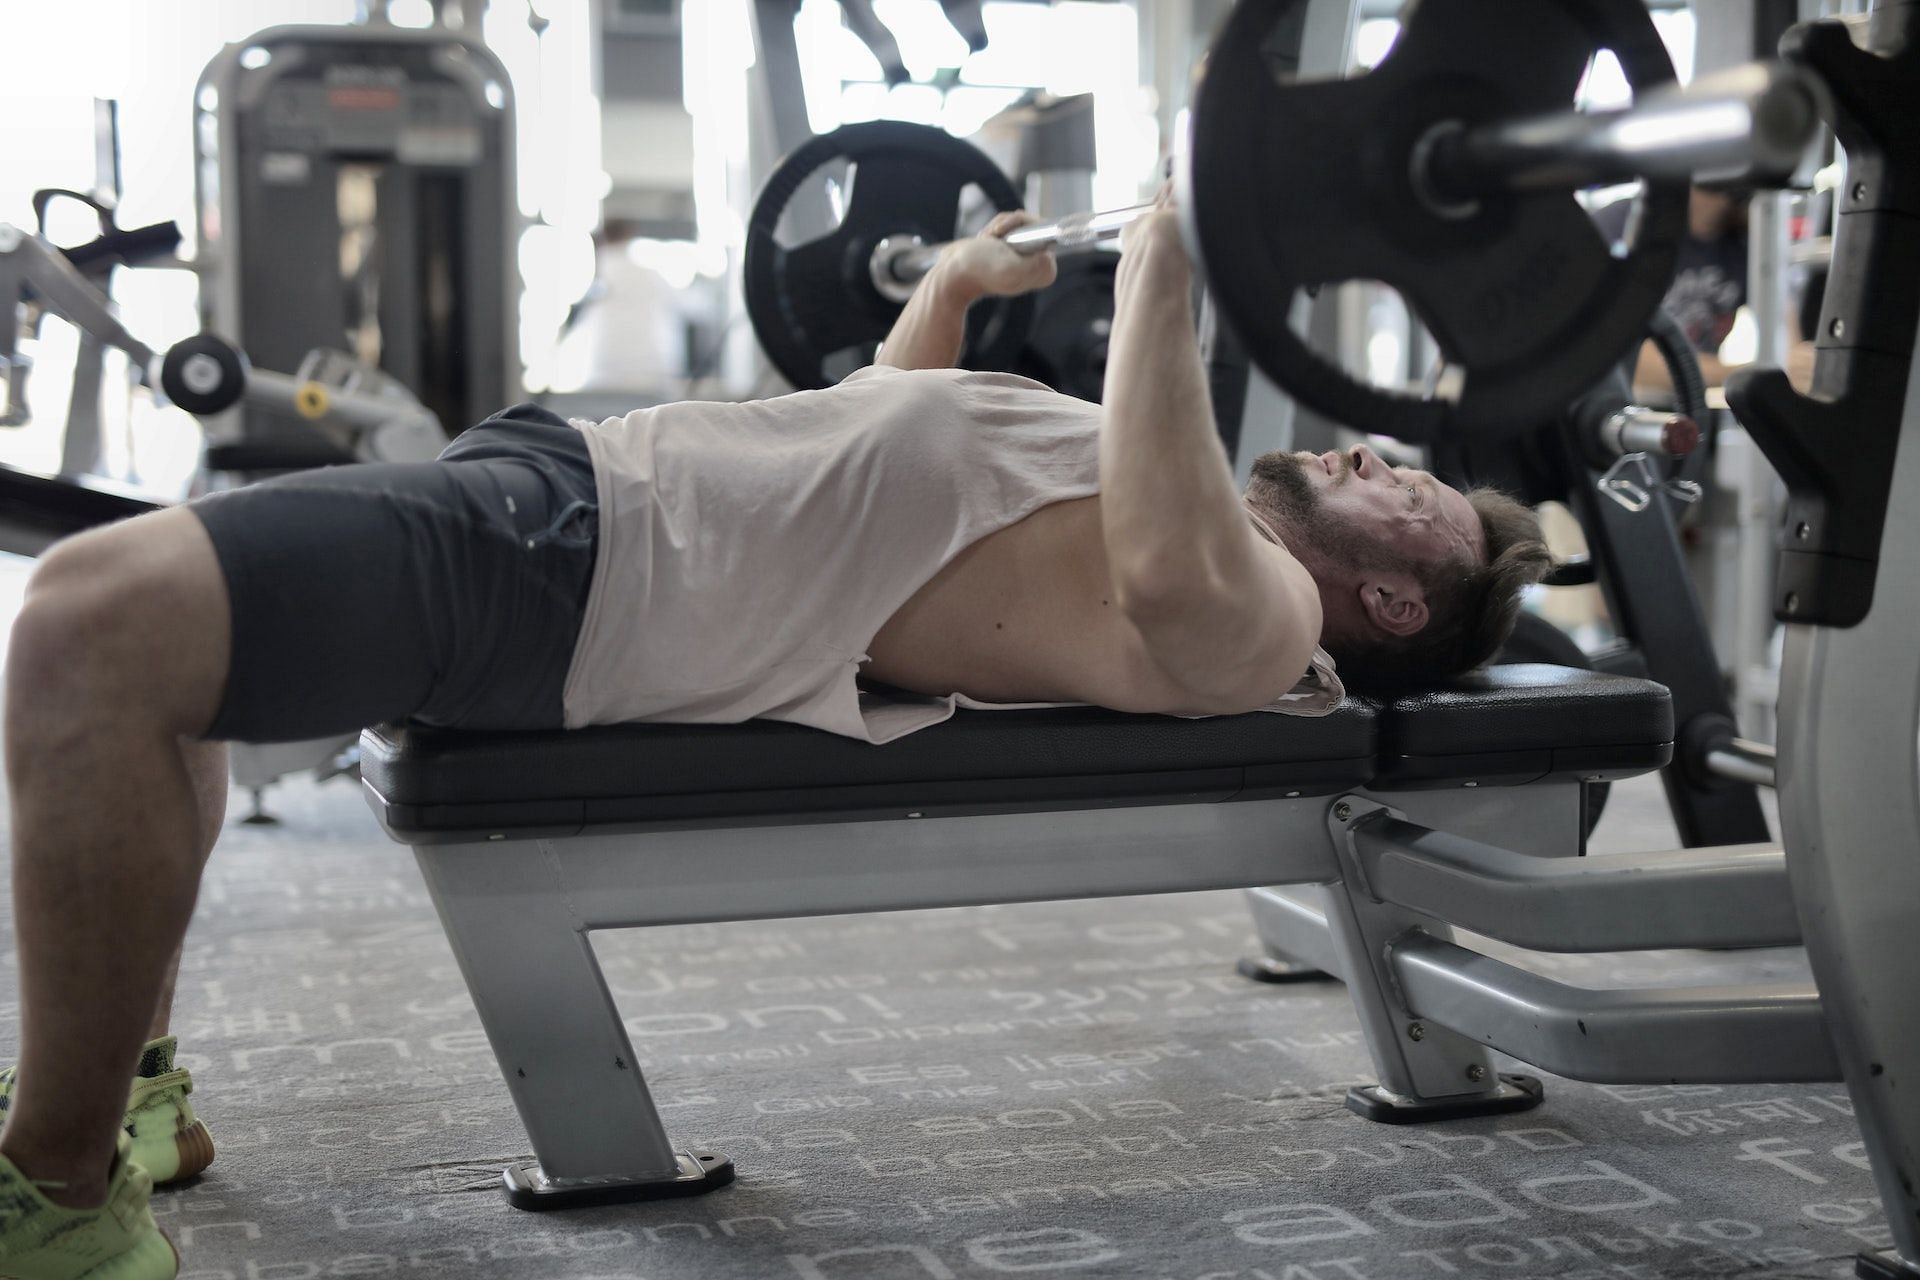 Chest and triceps workout help strengthen the upper-body. (Photo via Pexels/Andrea Piacquadio)